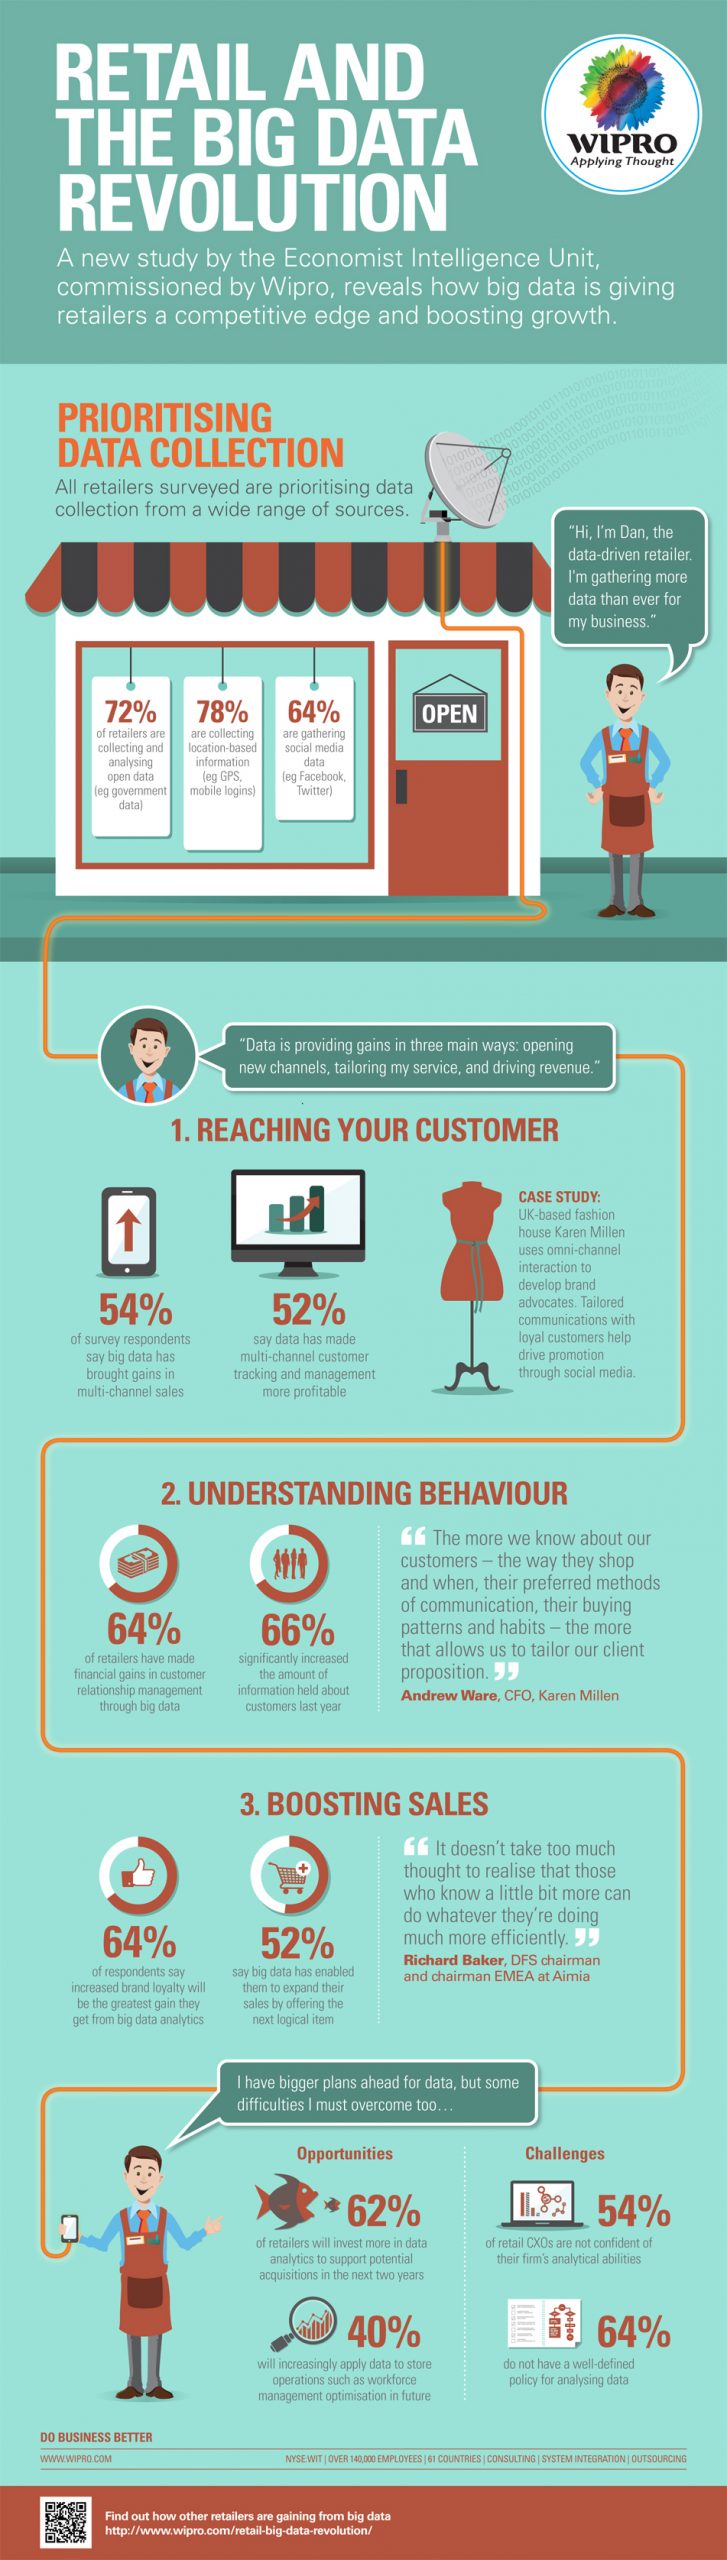 How Big Data Gives Retailers a Competitive Edge and Boosts Growth - Infographic